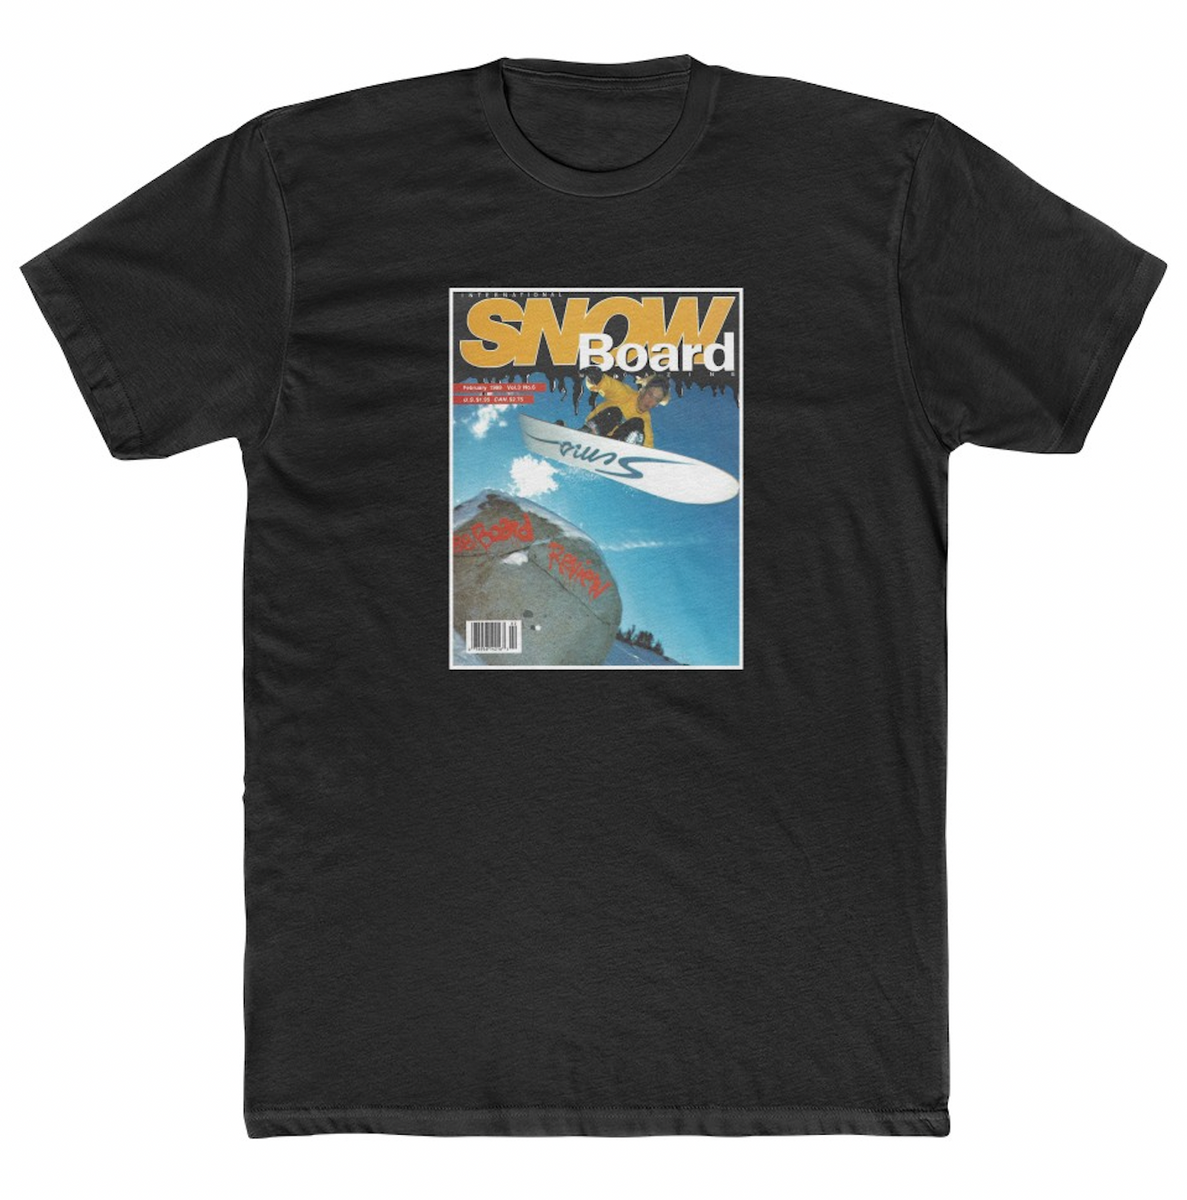 T Snowboarder 45RPM Vintage Cover Shirt ISM/Palmer -